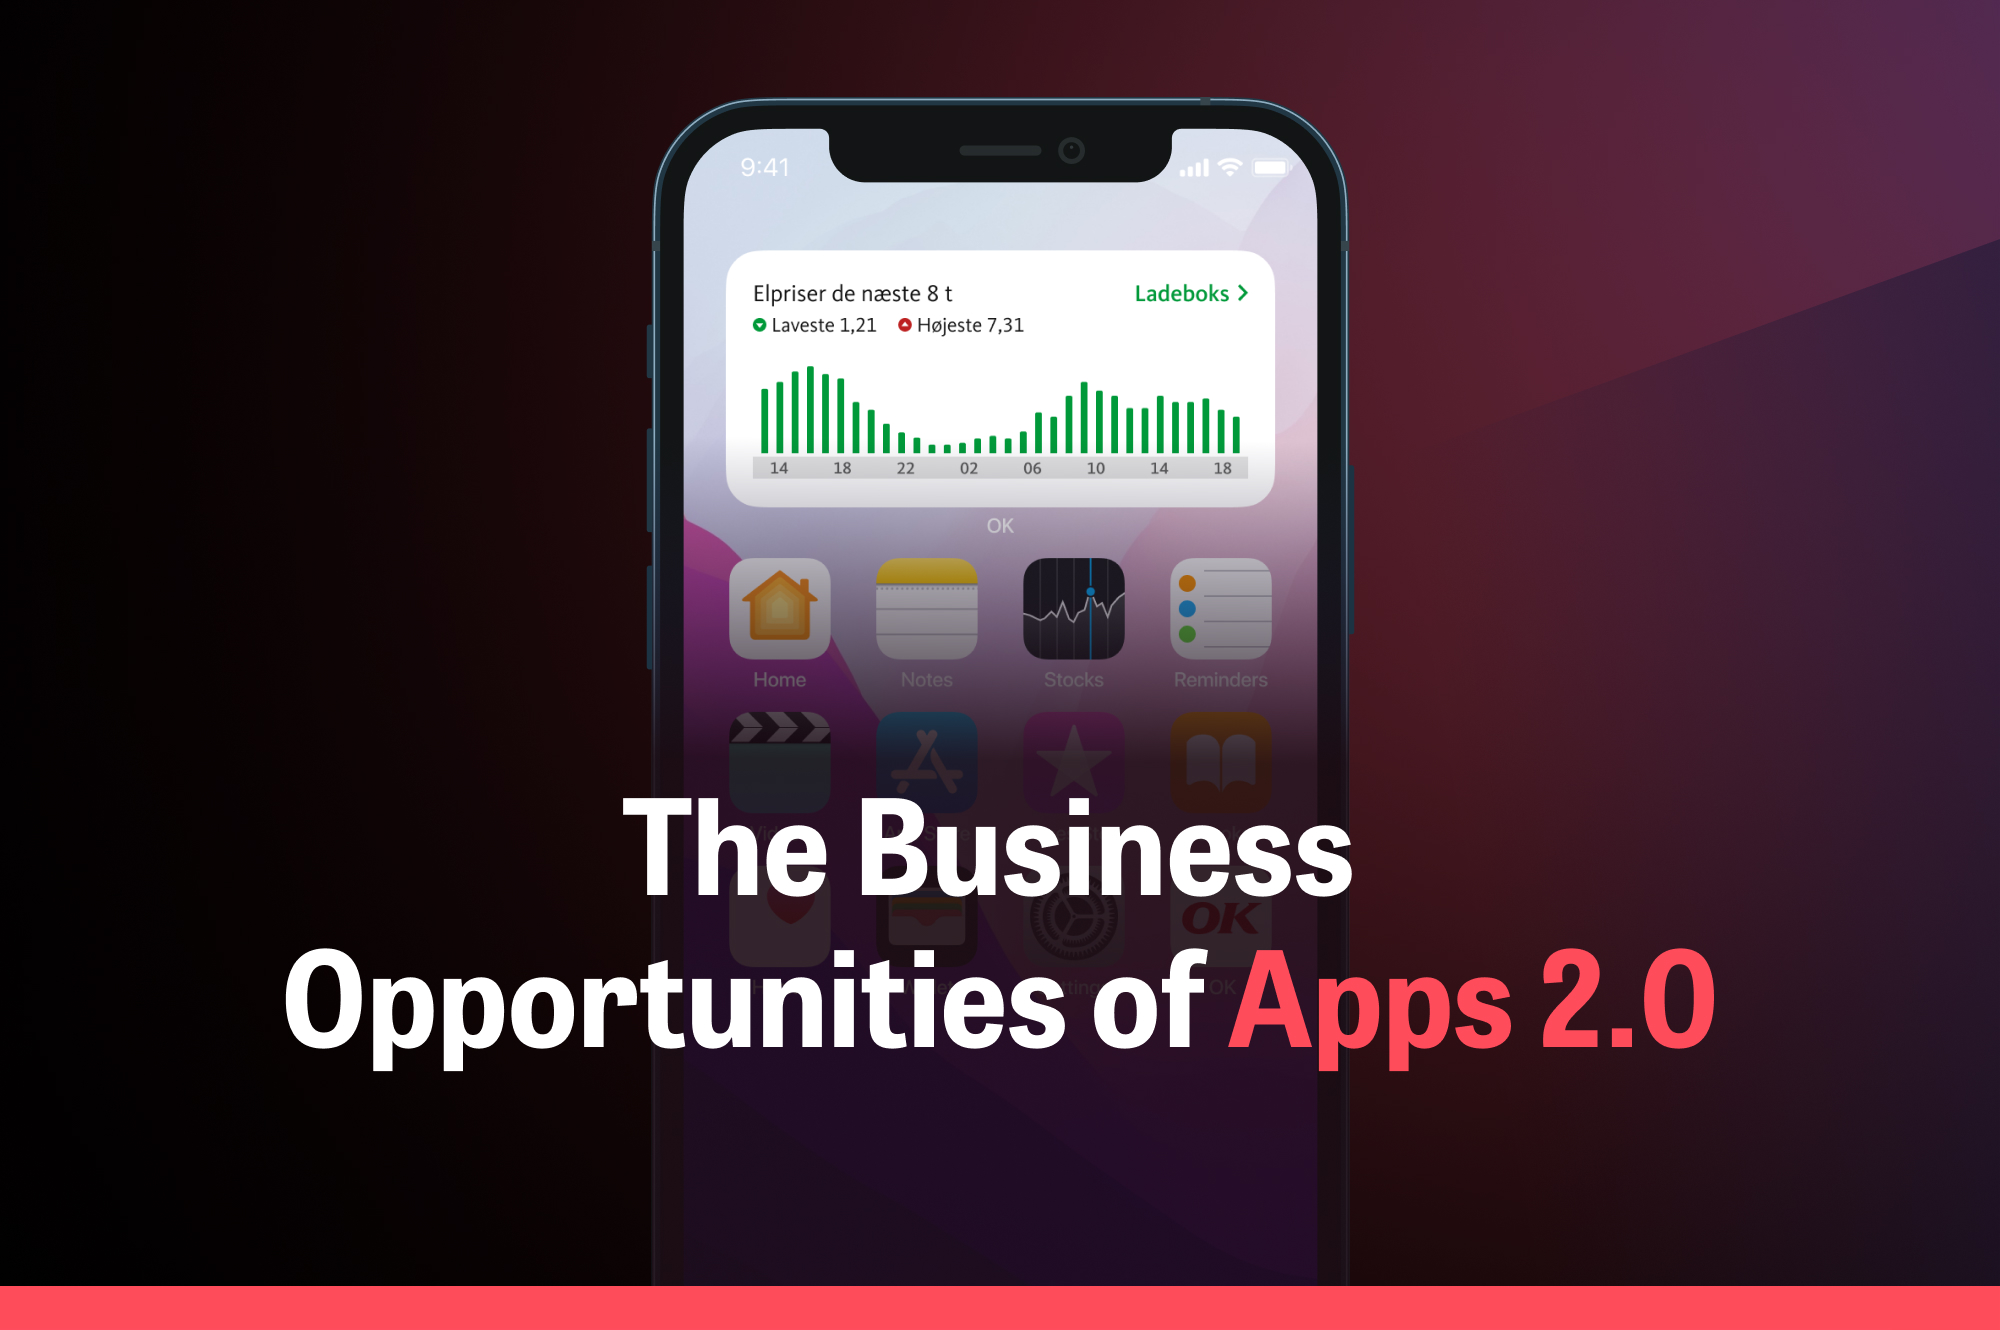 The Business Opportunities of Apps 2.0